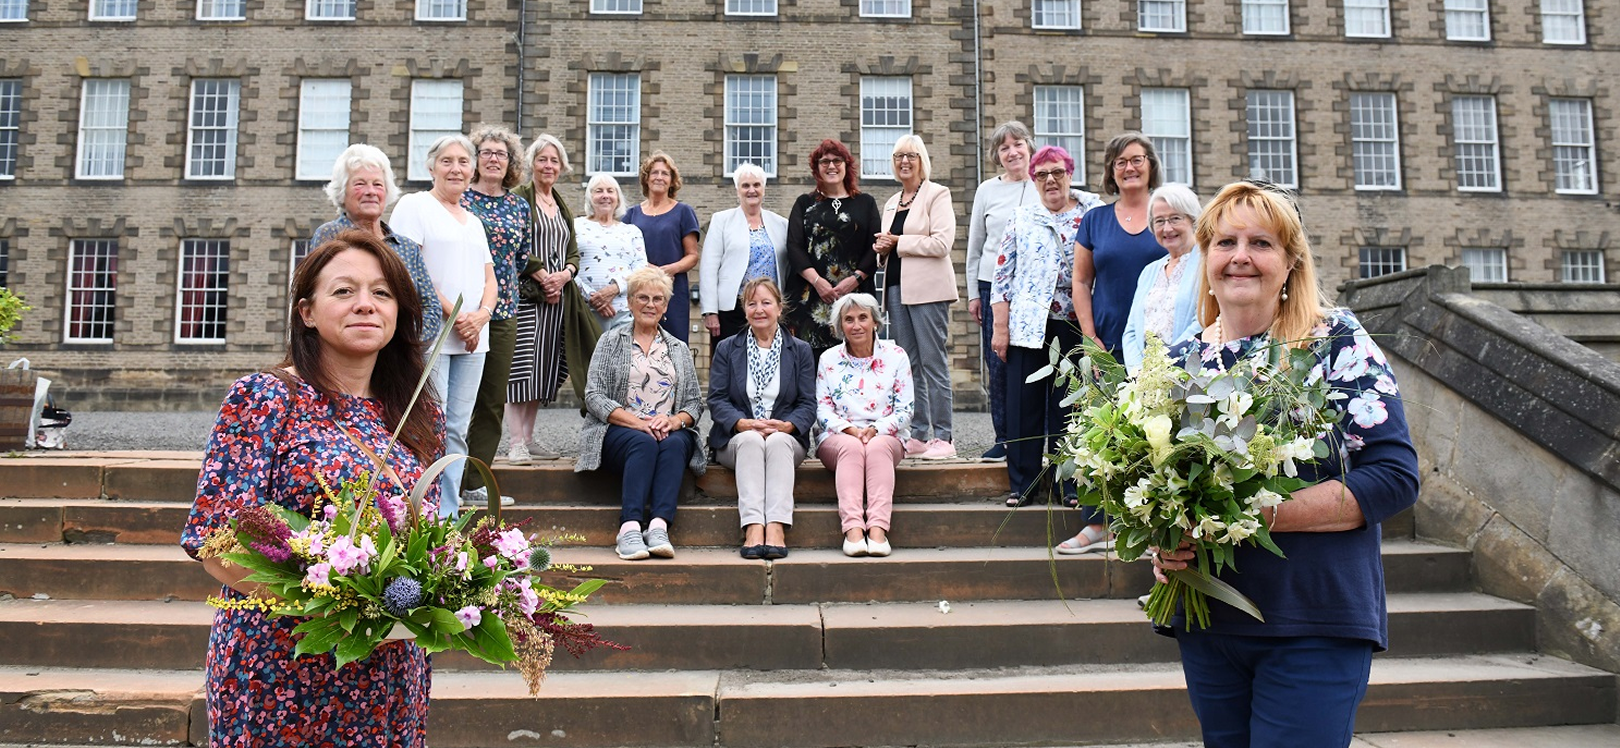 L (foreground) Tracey Russell, business development manager Ushaw, R (foreground) Pam Oliver, Hidden Histories, with Ushaw Flower Fest volunteers 2022 at Ushaw Historic House